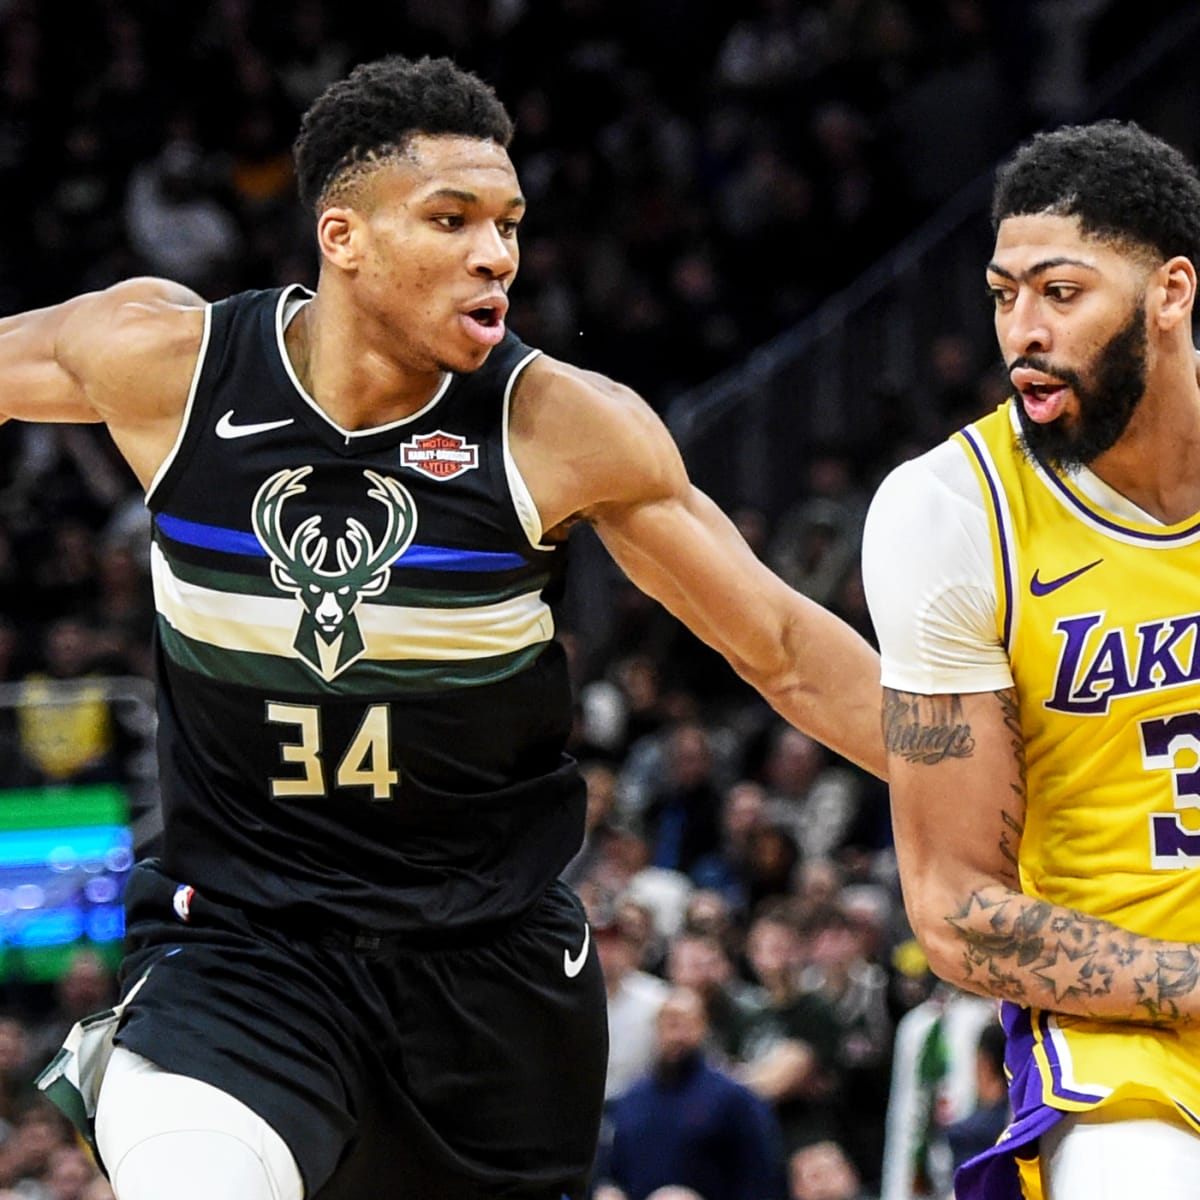 All-Access: Bucks vs. Lakers, The Unseen Footage From Giannis vs. LeBron